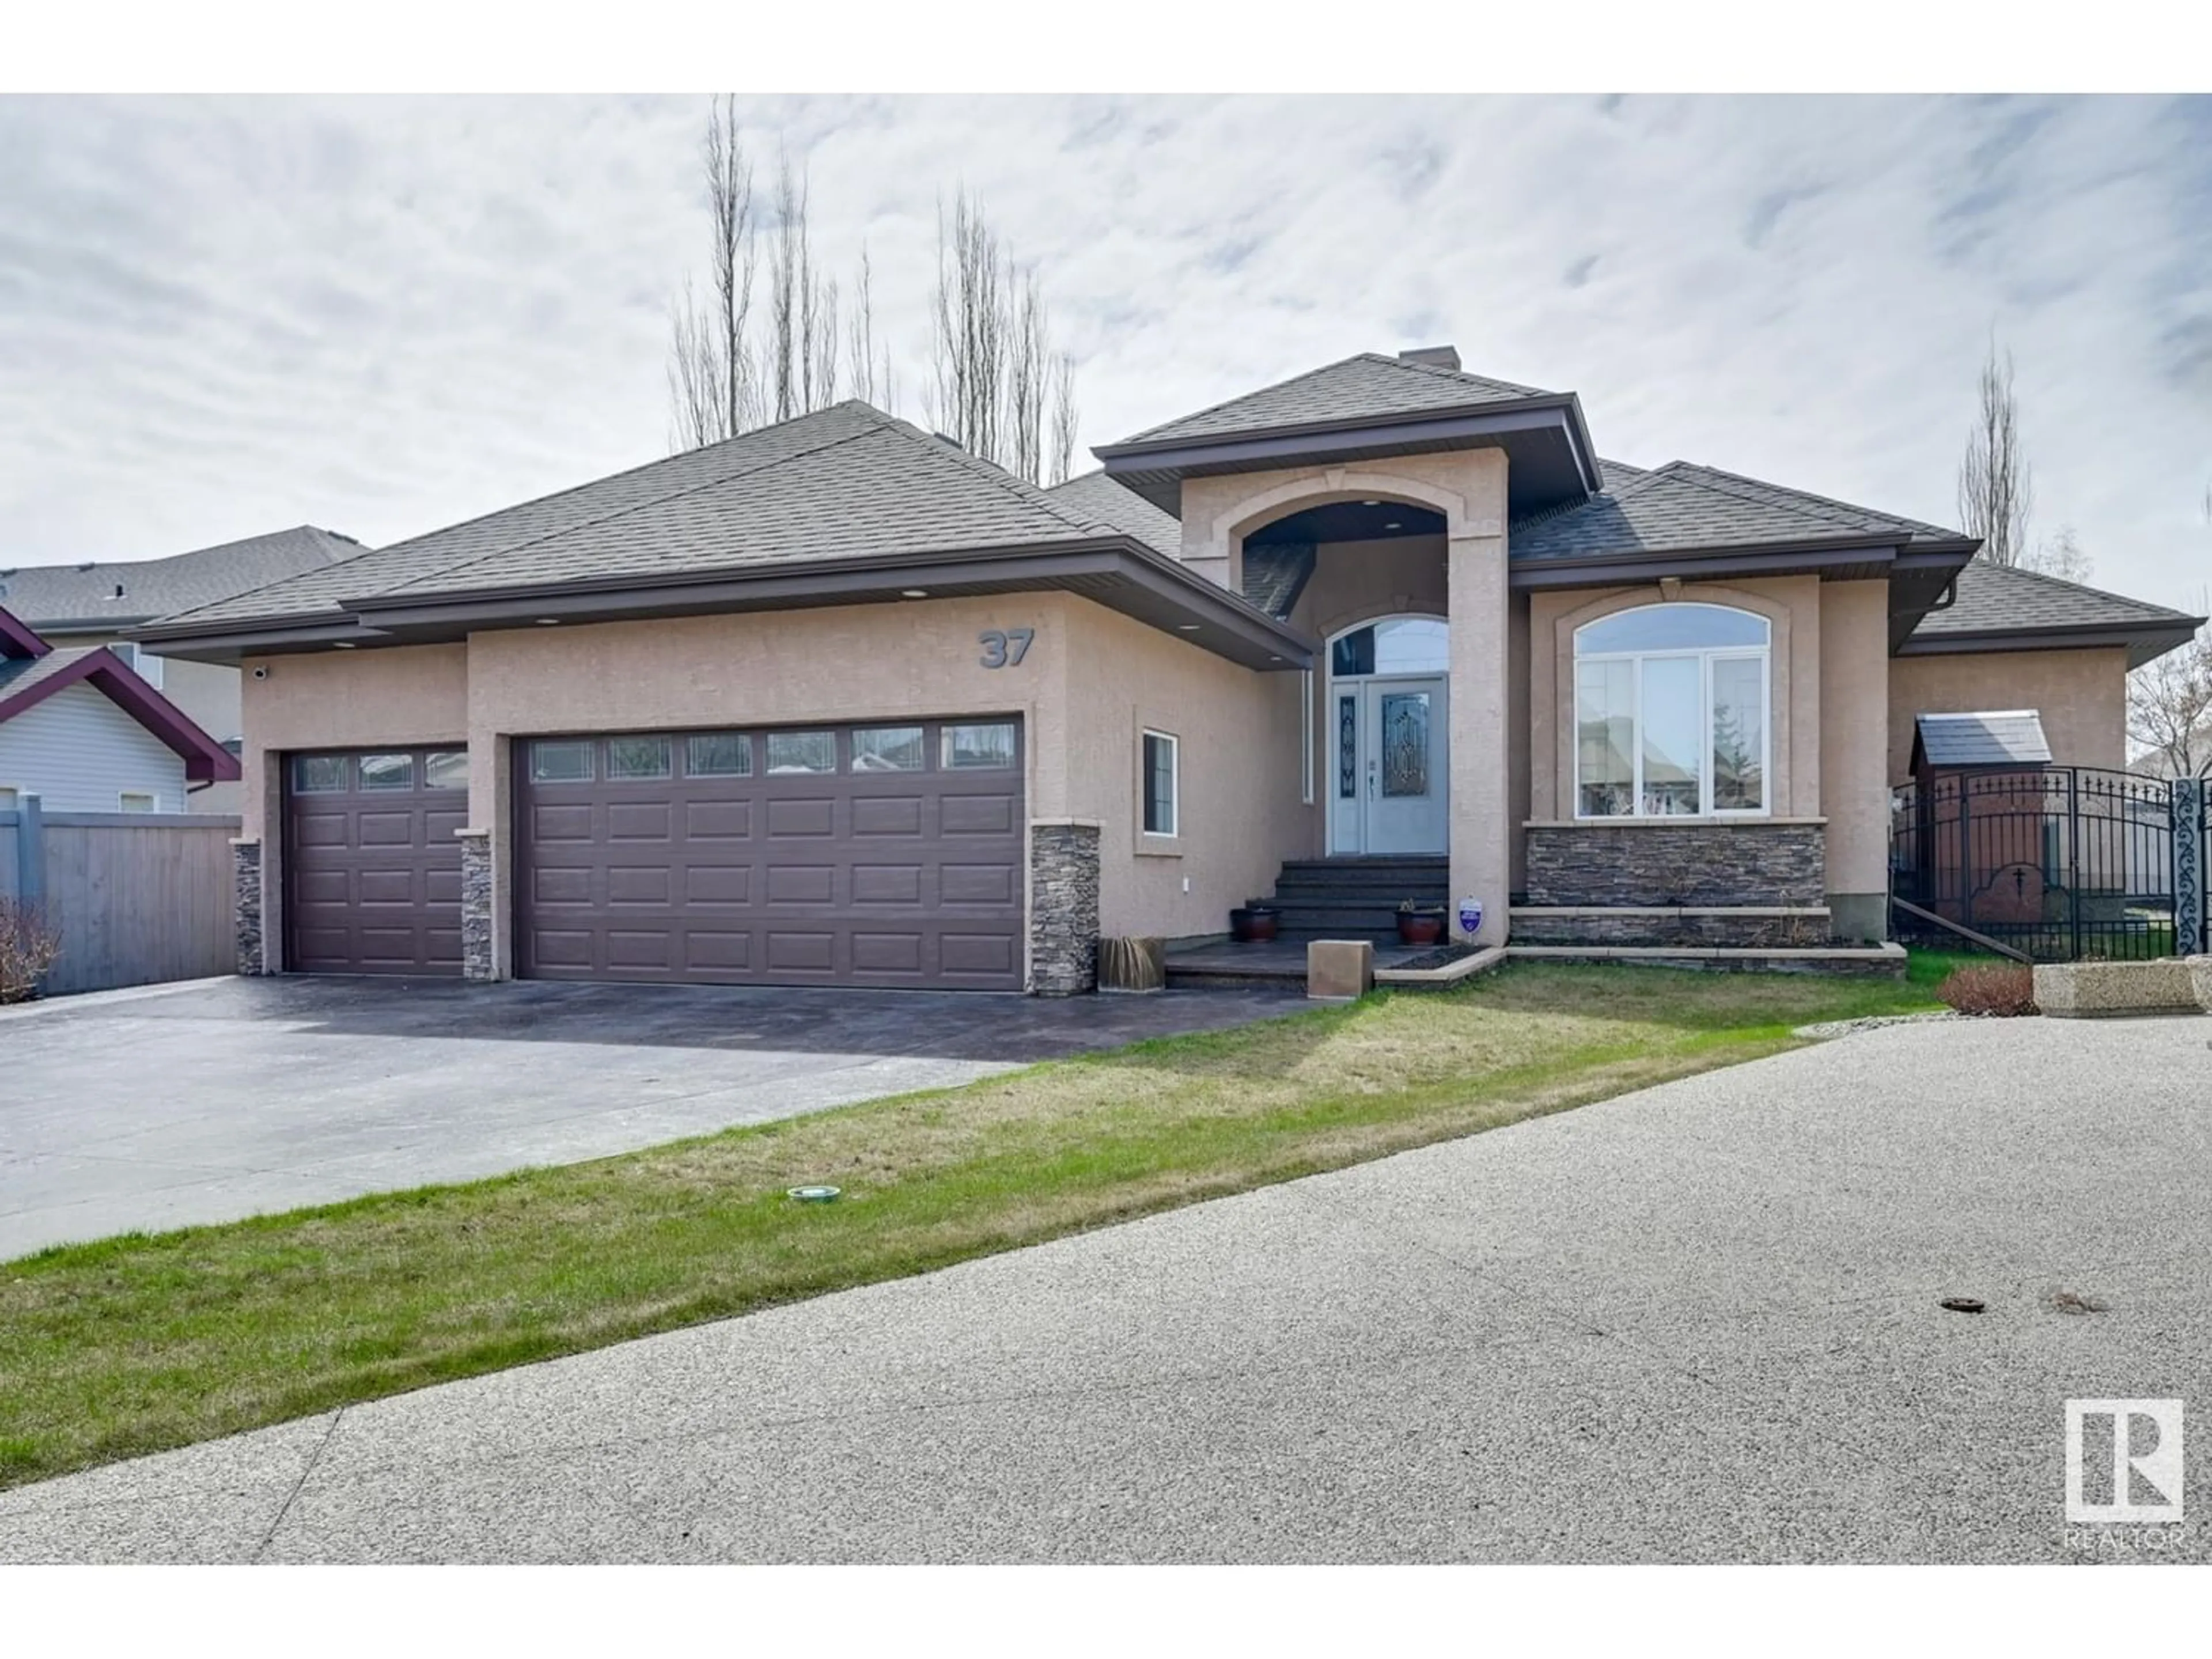 Frontside or backside of a home for 37 LOISELLE WY, St. Albert Alberta T8N3C4